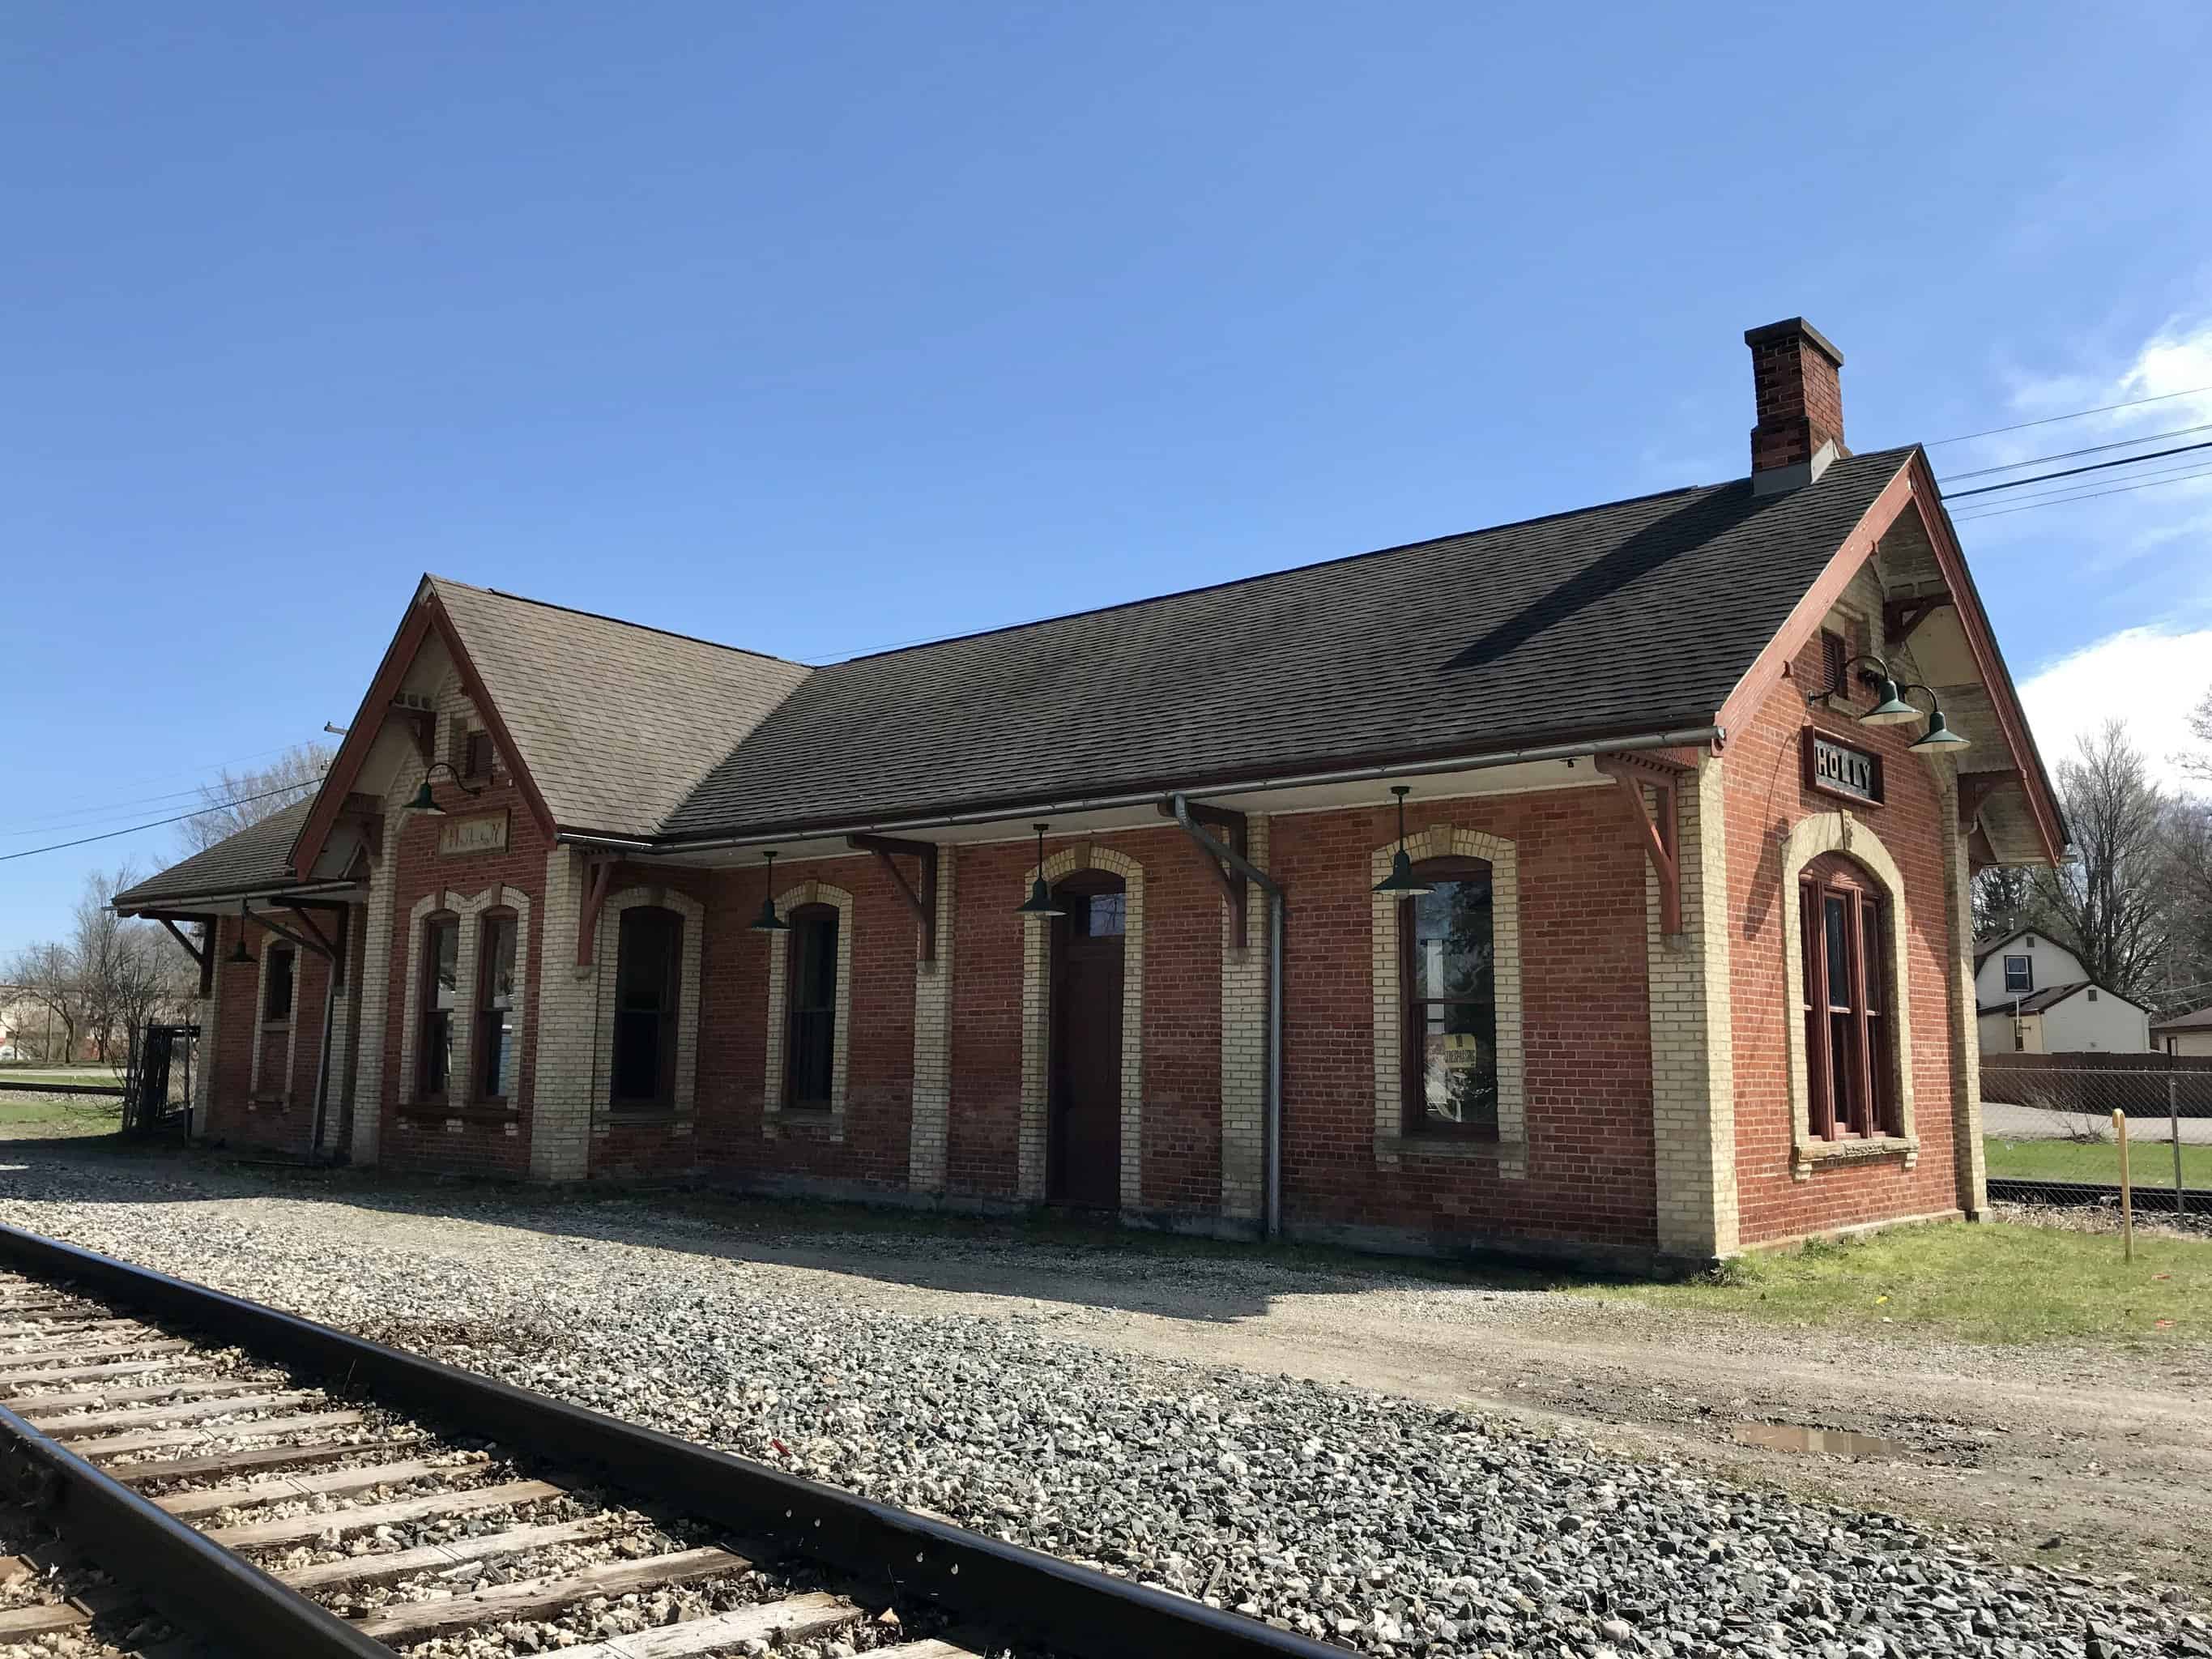 Our Historic Landmark, The Holly Union Depot, built in 1886